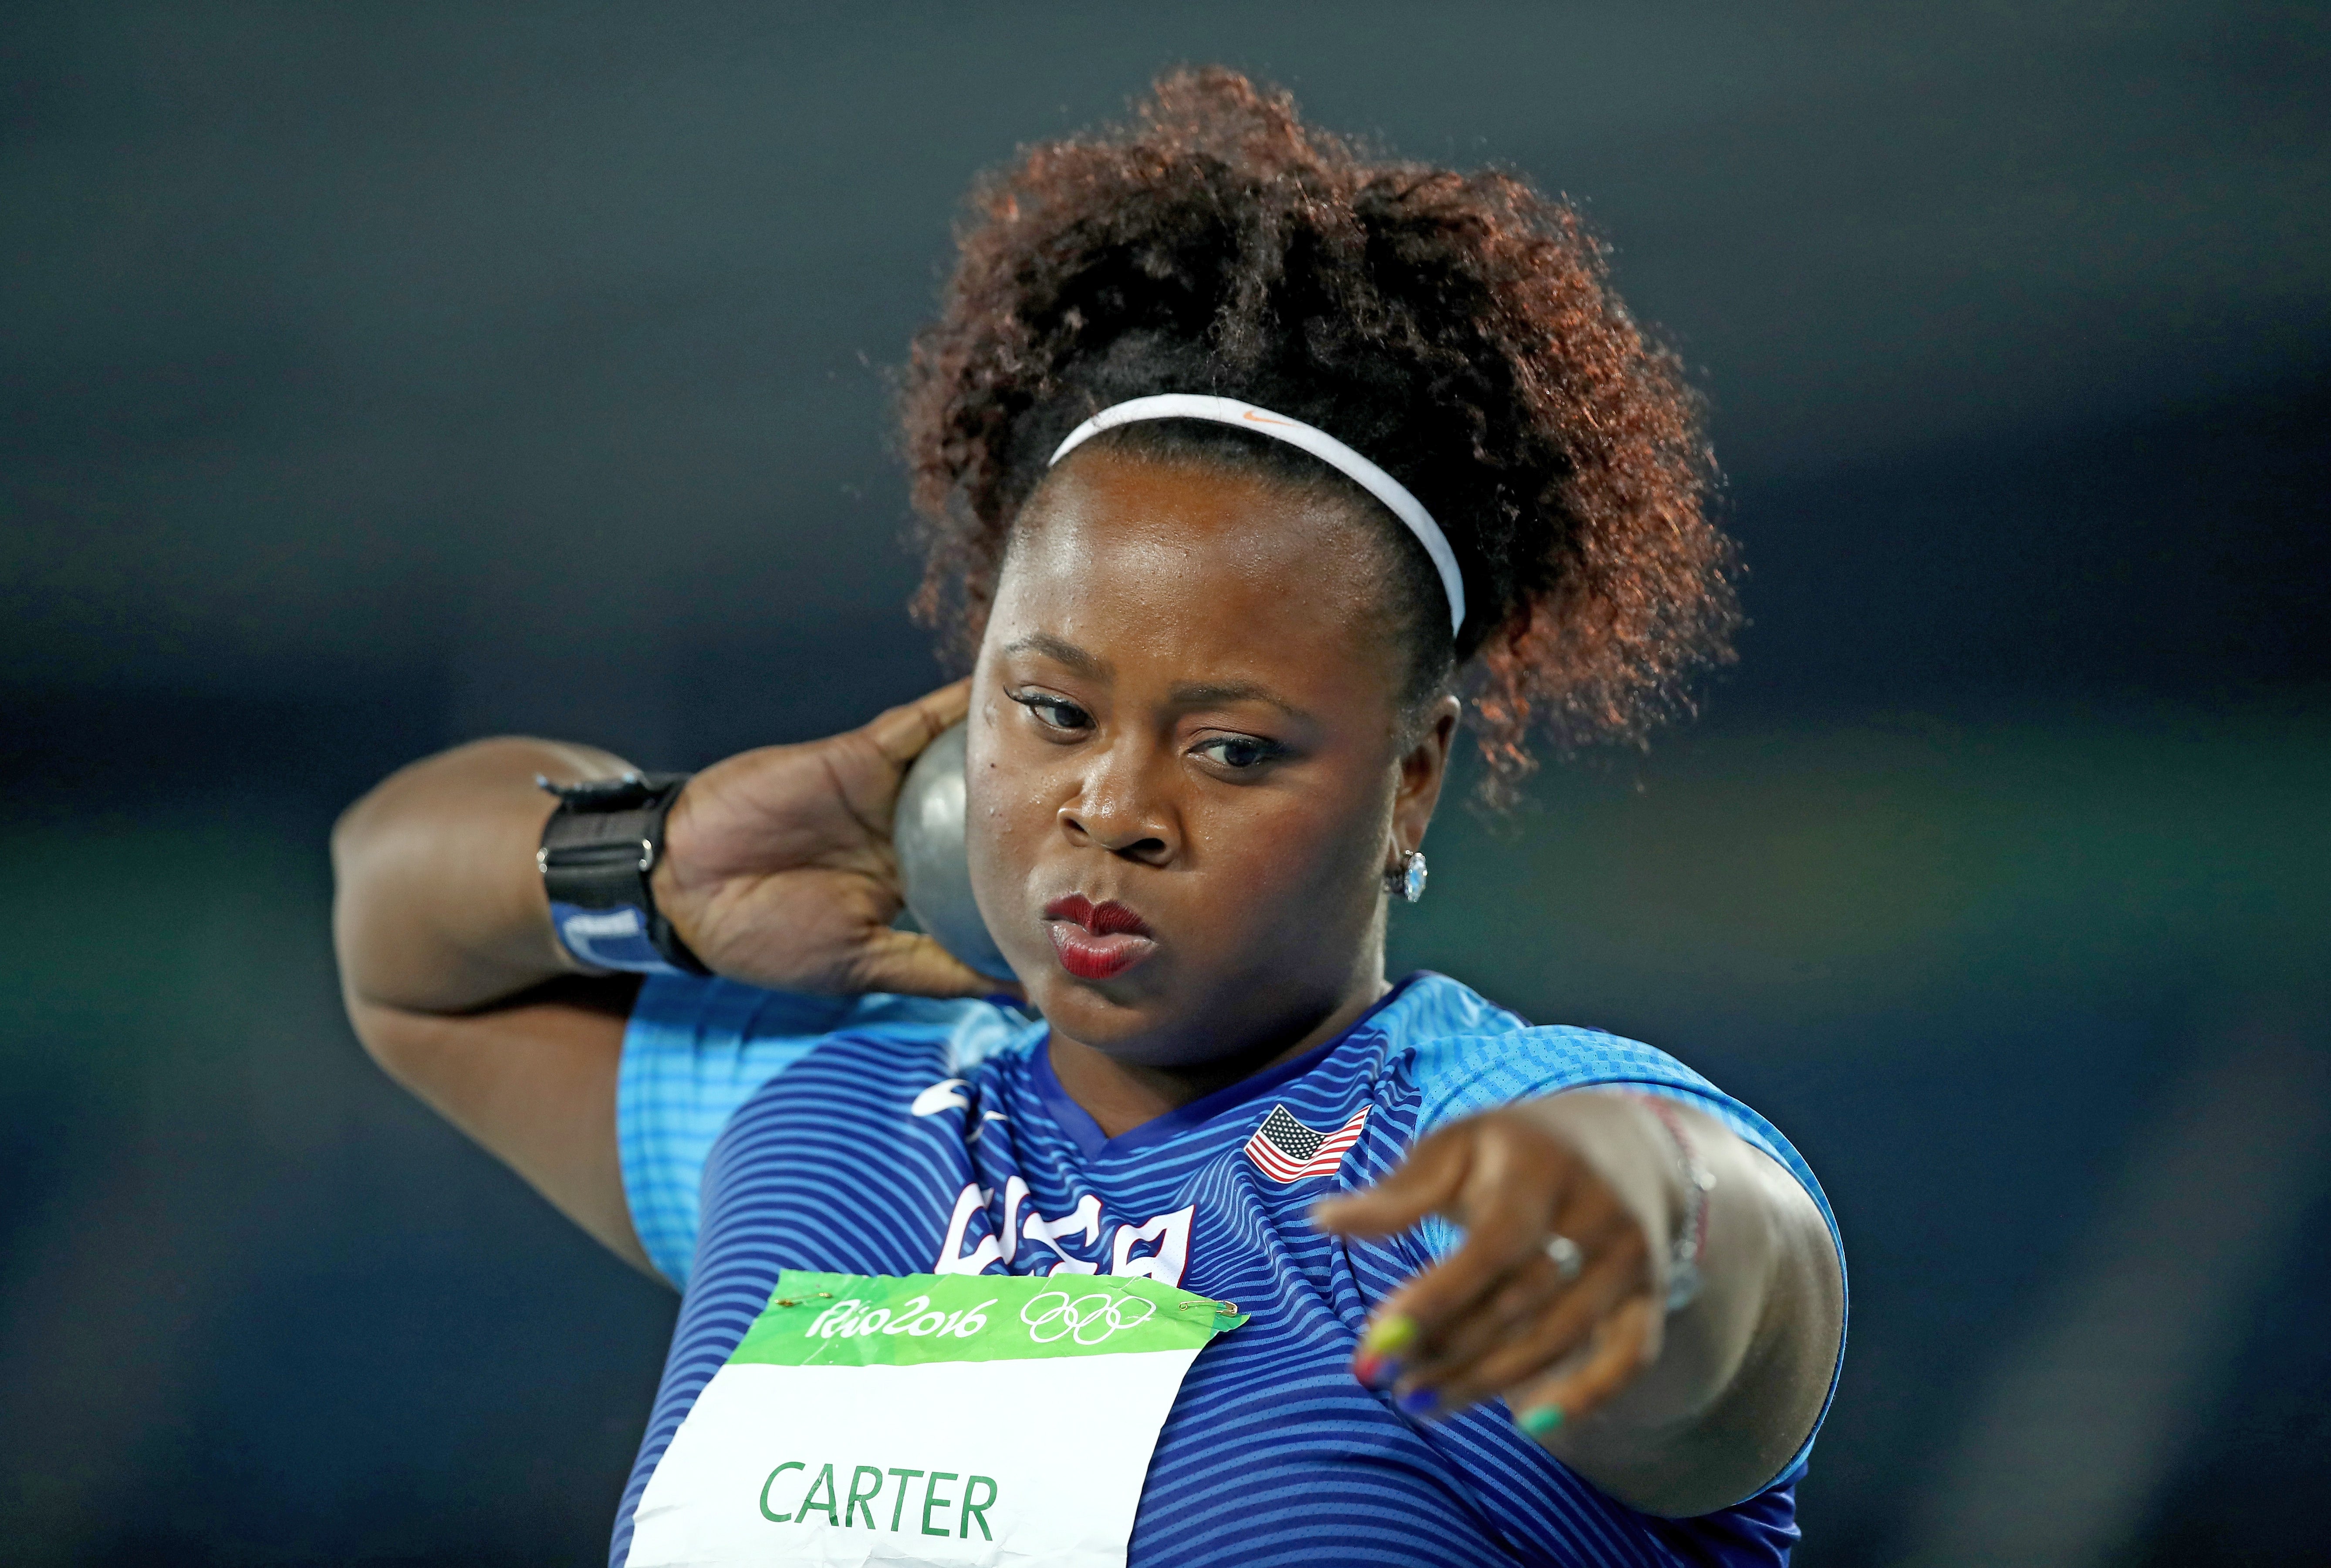 These Olympic Track and Field Stars Are Hair and Beauty Goals
